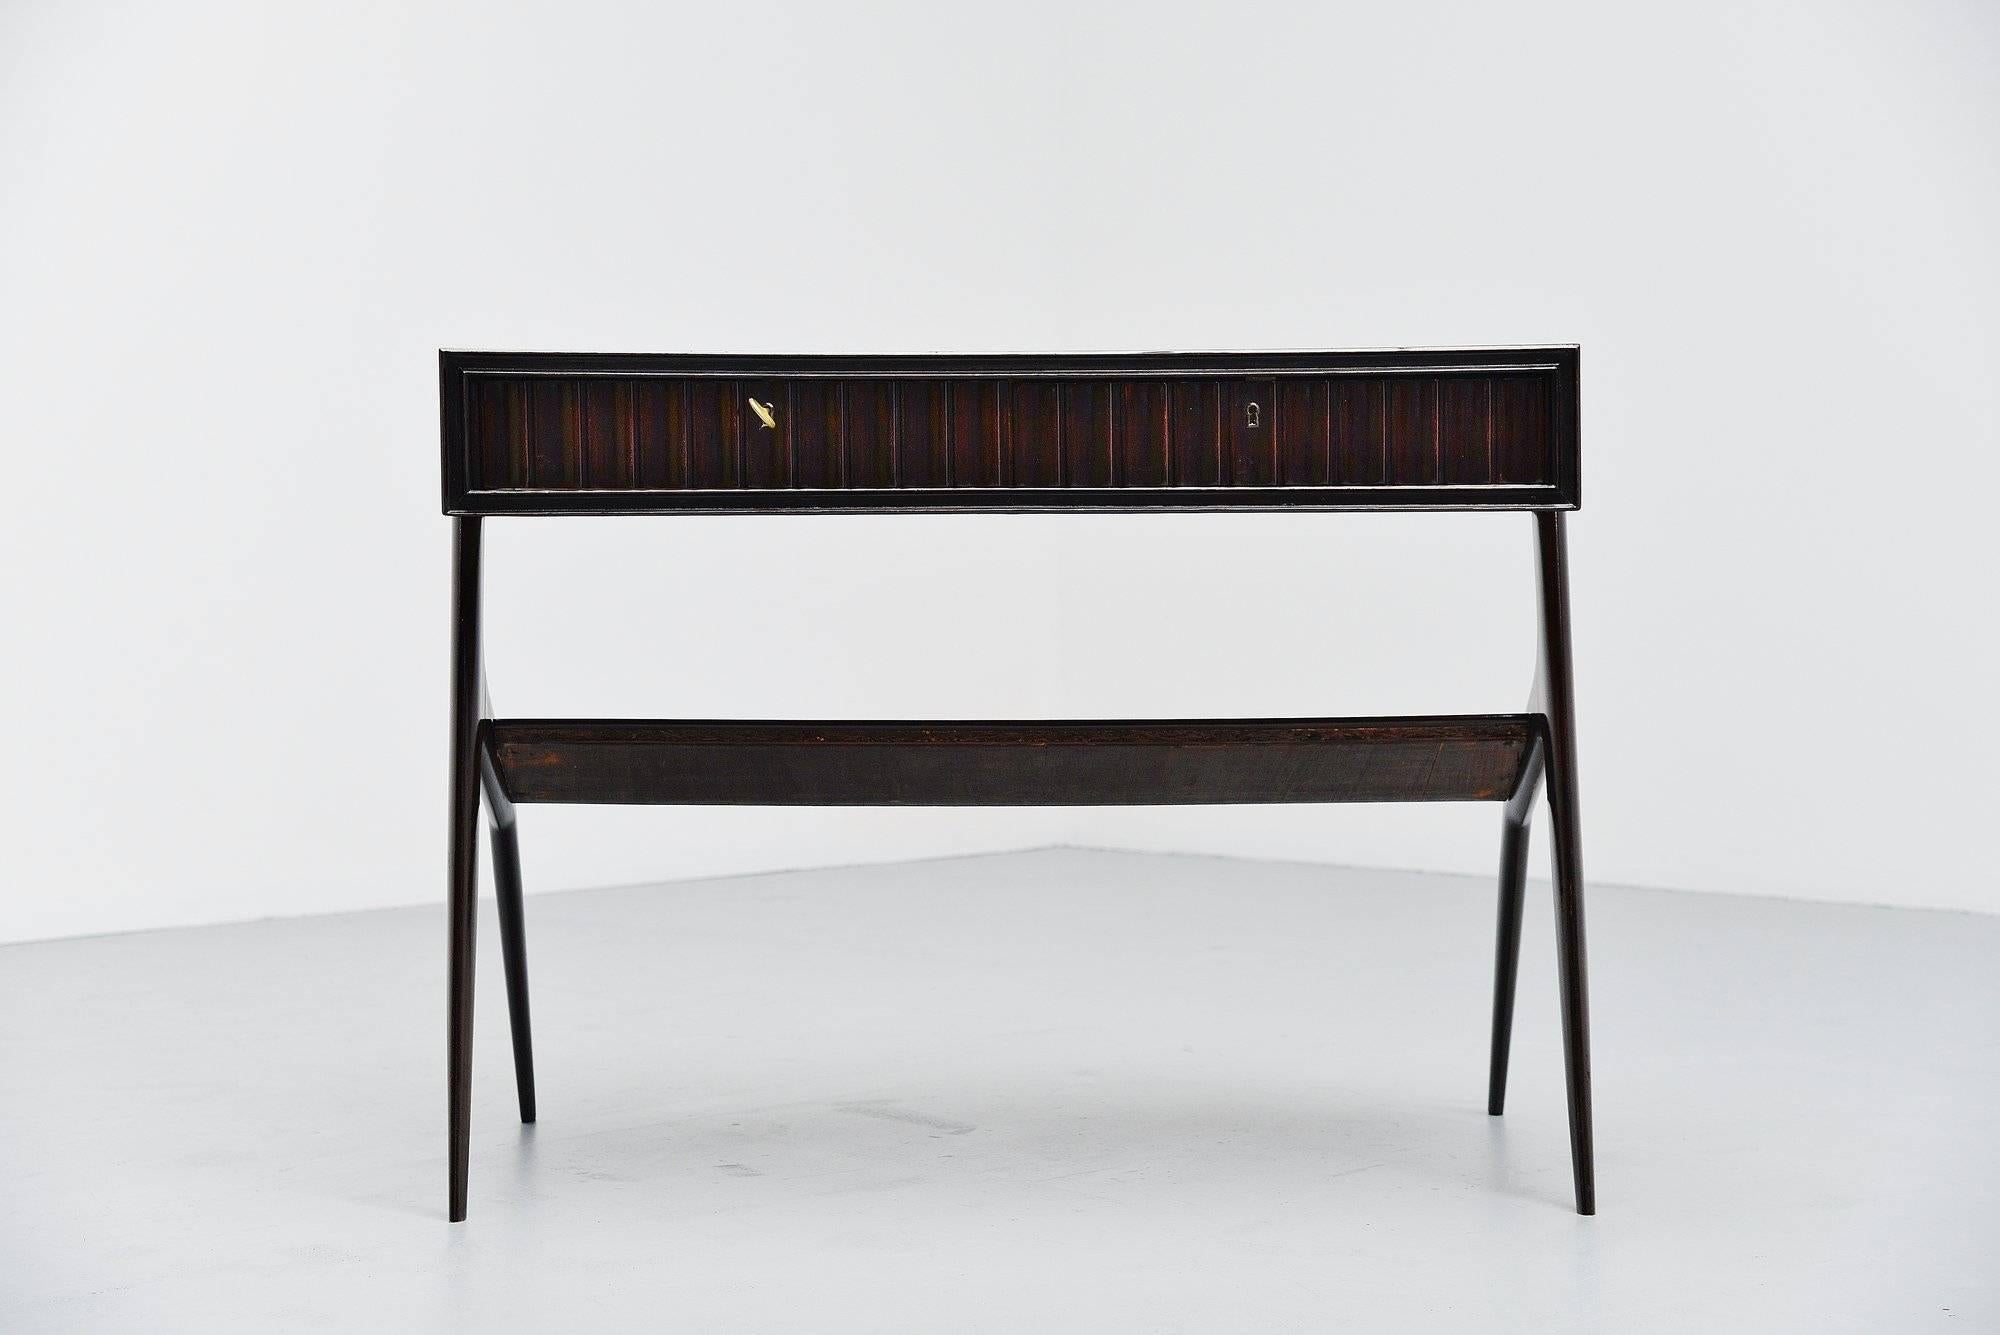 Fantastic shaped small writing desk attributed to Ico Parisi, Italy, 1950. The shape of this desk is very similar to several designs by Ico Parisi, the organic lines are very characteristic for the designs by Parisi. The desk has dark stained beech